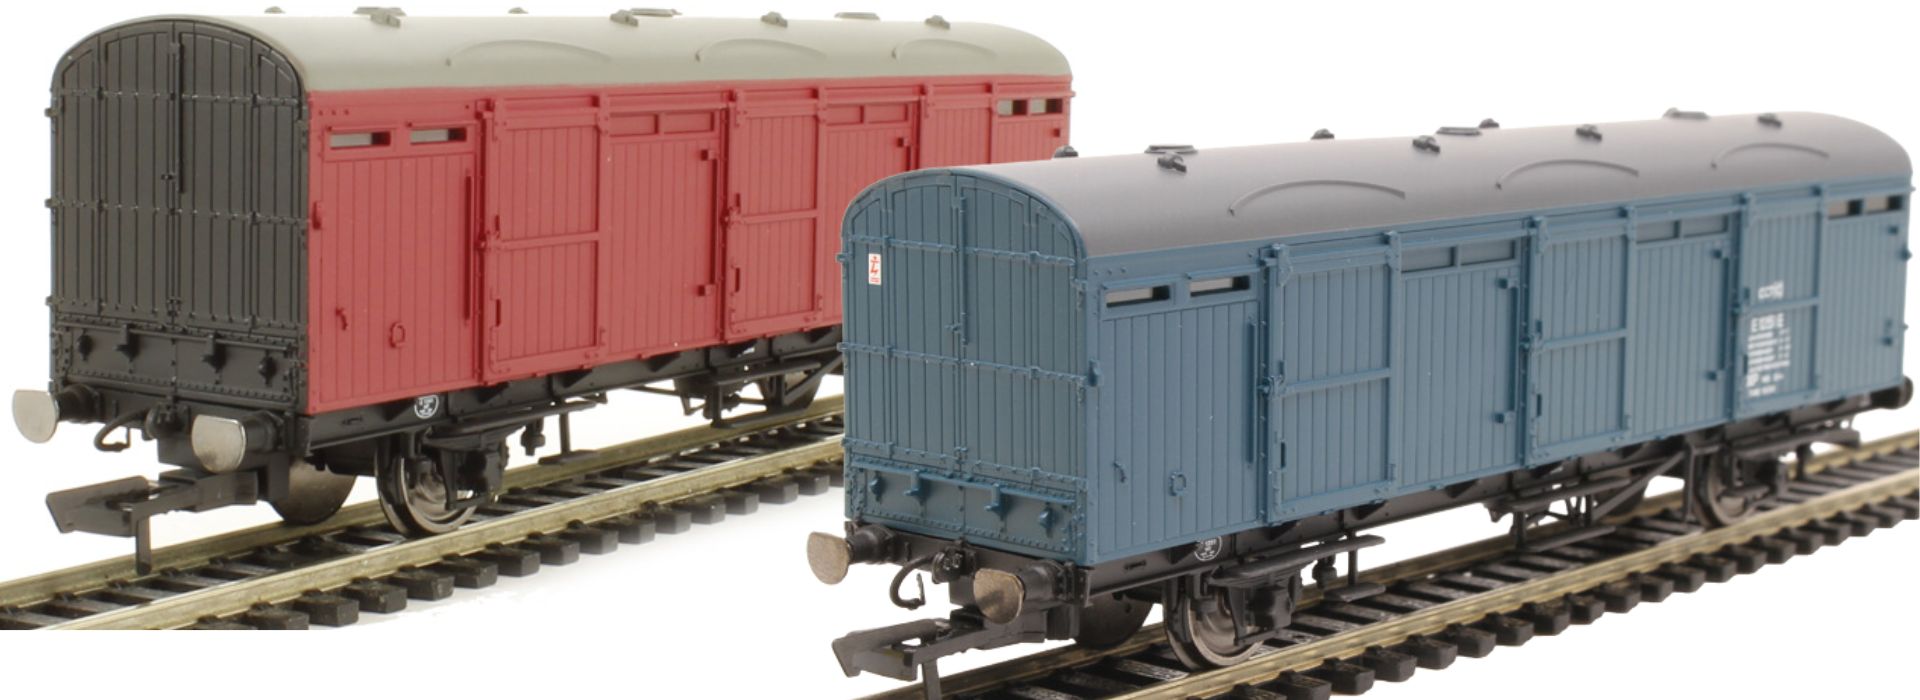 Hornby OO Gauge (1:76 Scale) LNER CCT covered carriage truck